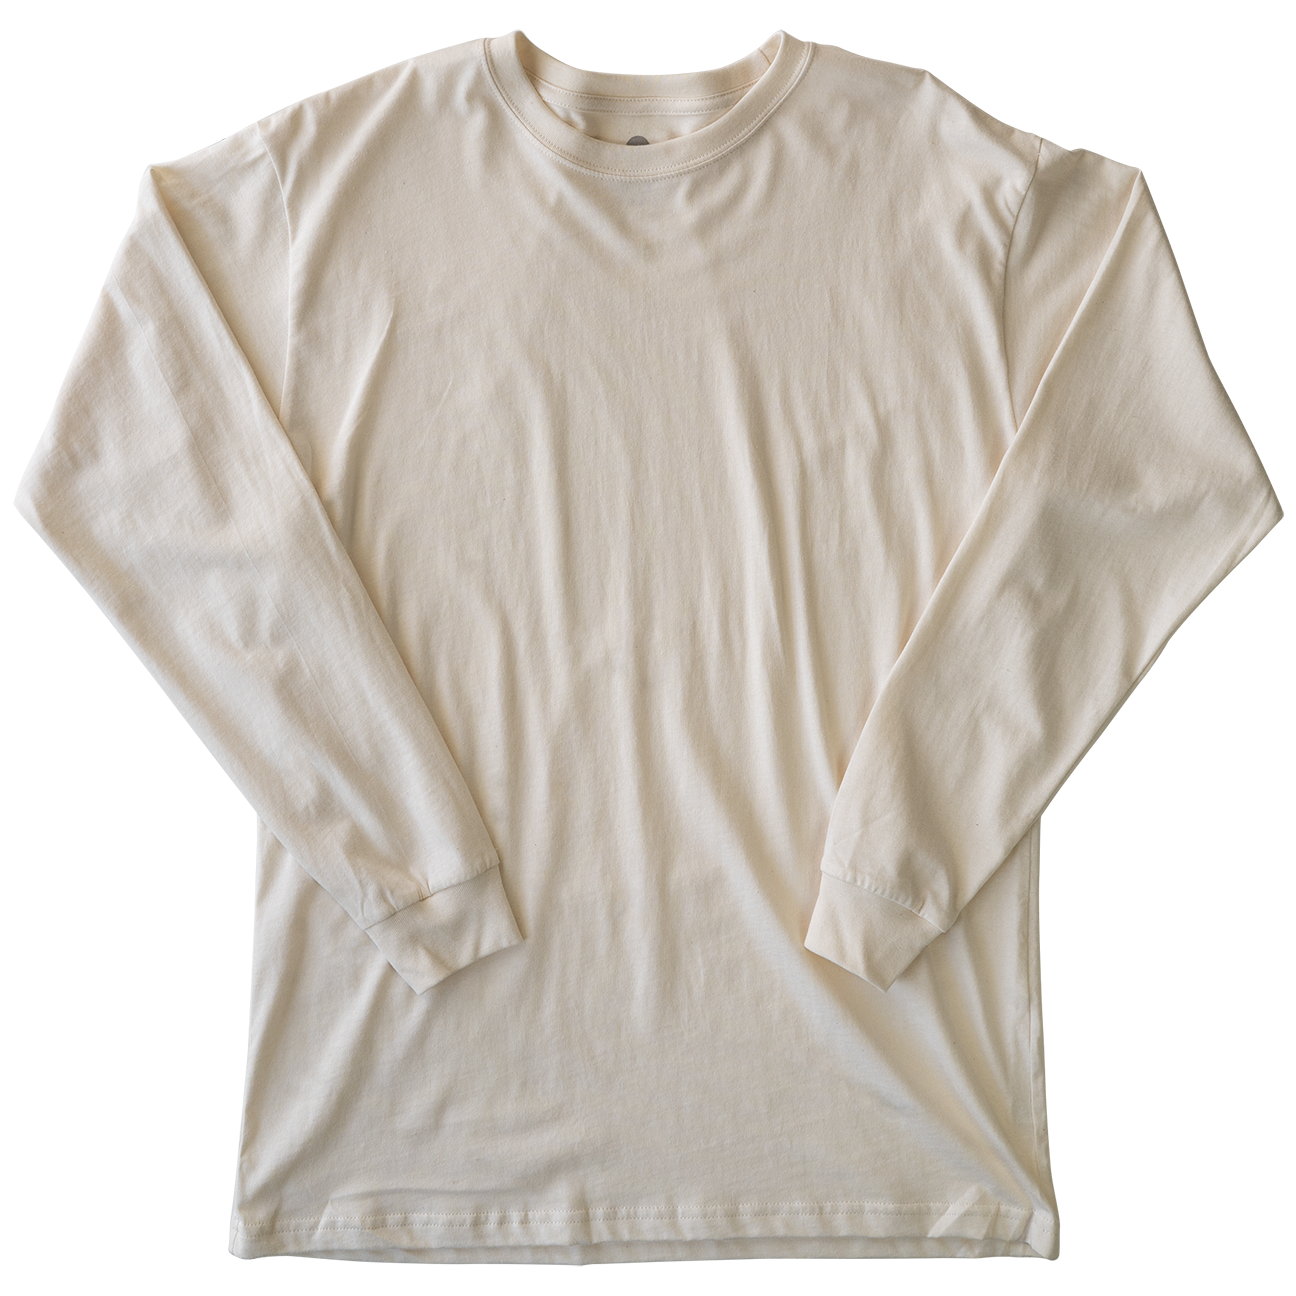 Nature Backs Long Sleeve 100% Organic Cotton T-Shirt | Minimalist Natural Long Sleeve made with Eco-Friendly Fibers Sustainably made in the USA 